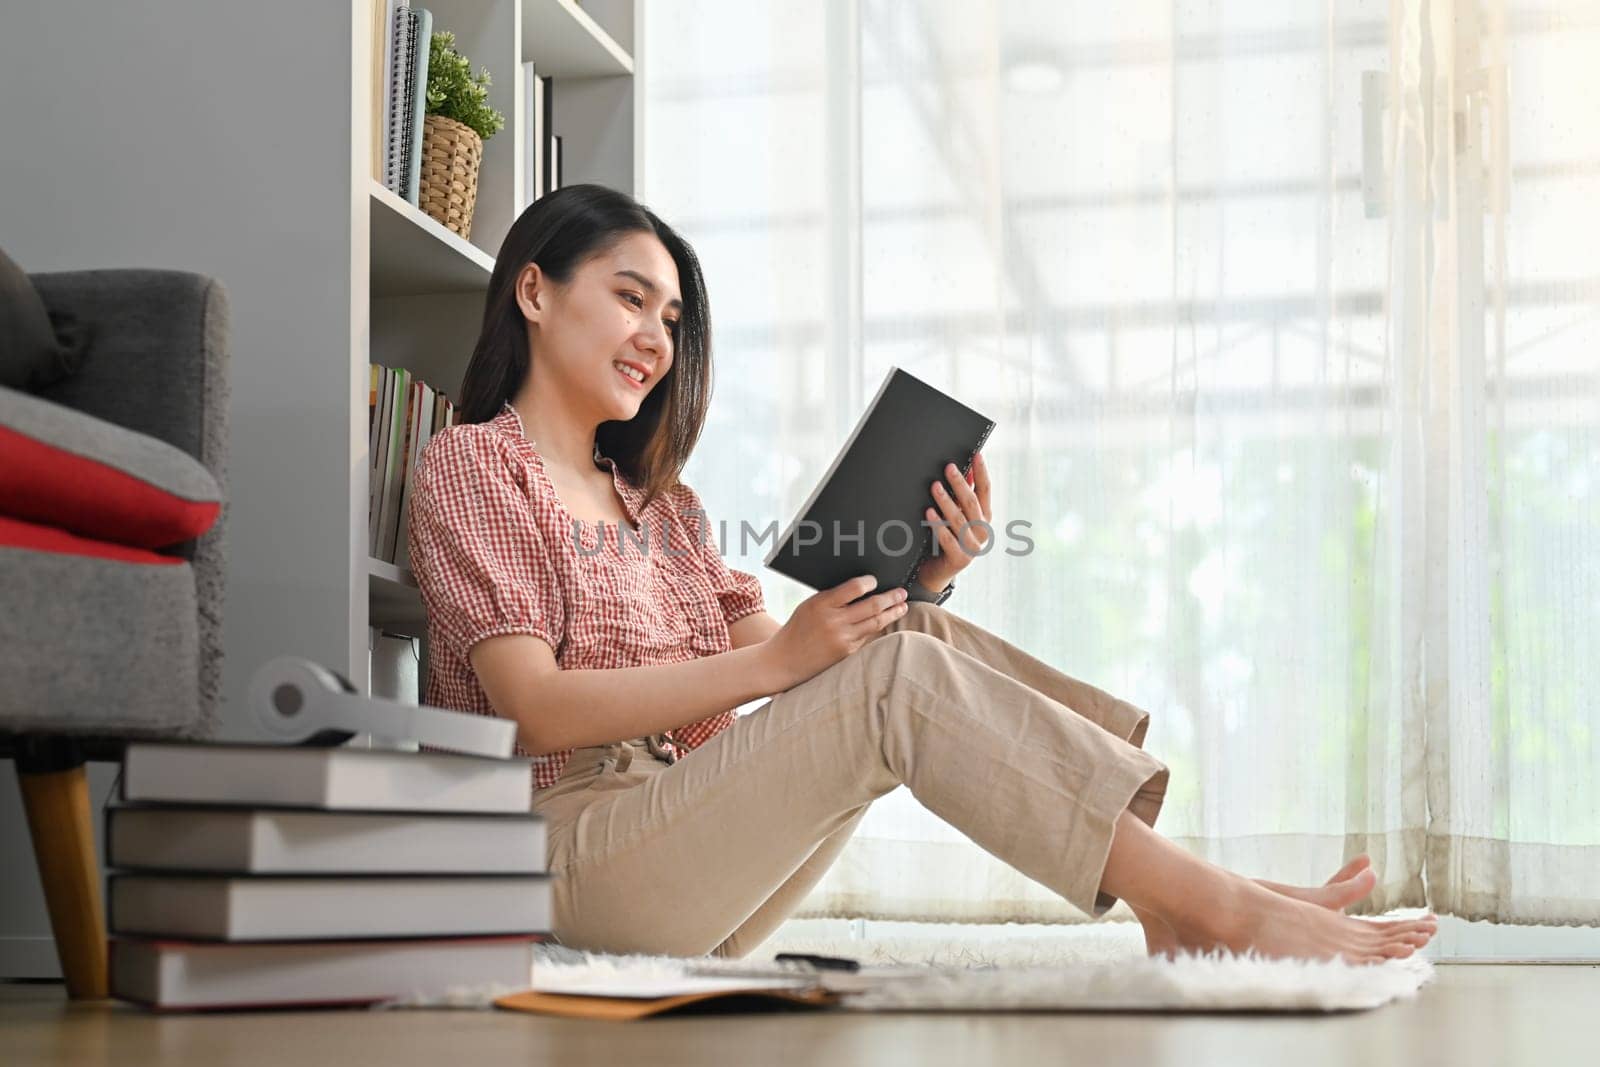 Bottom view of beautiful woman sitting floor in living room and reading a book, spending leisure weekend time at home.